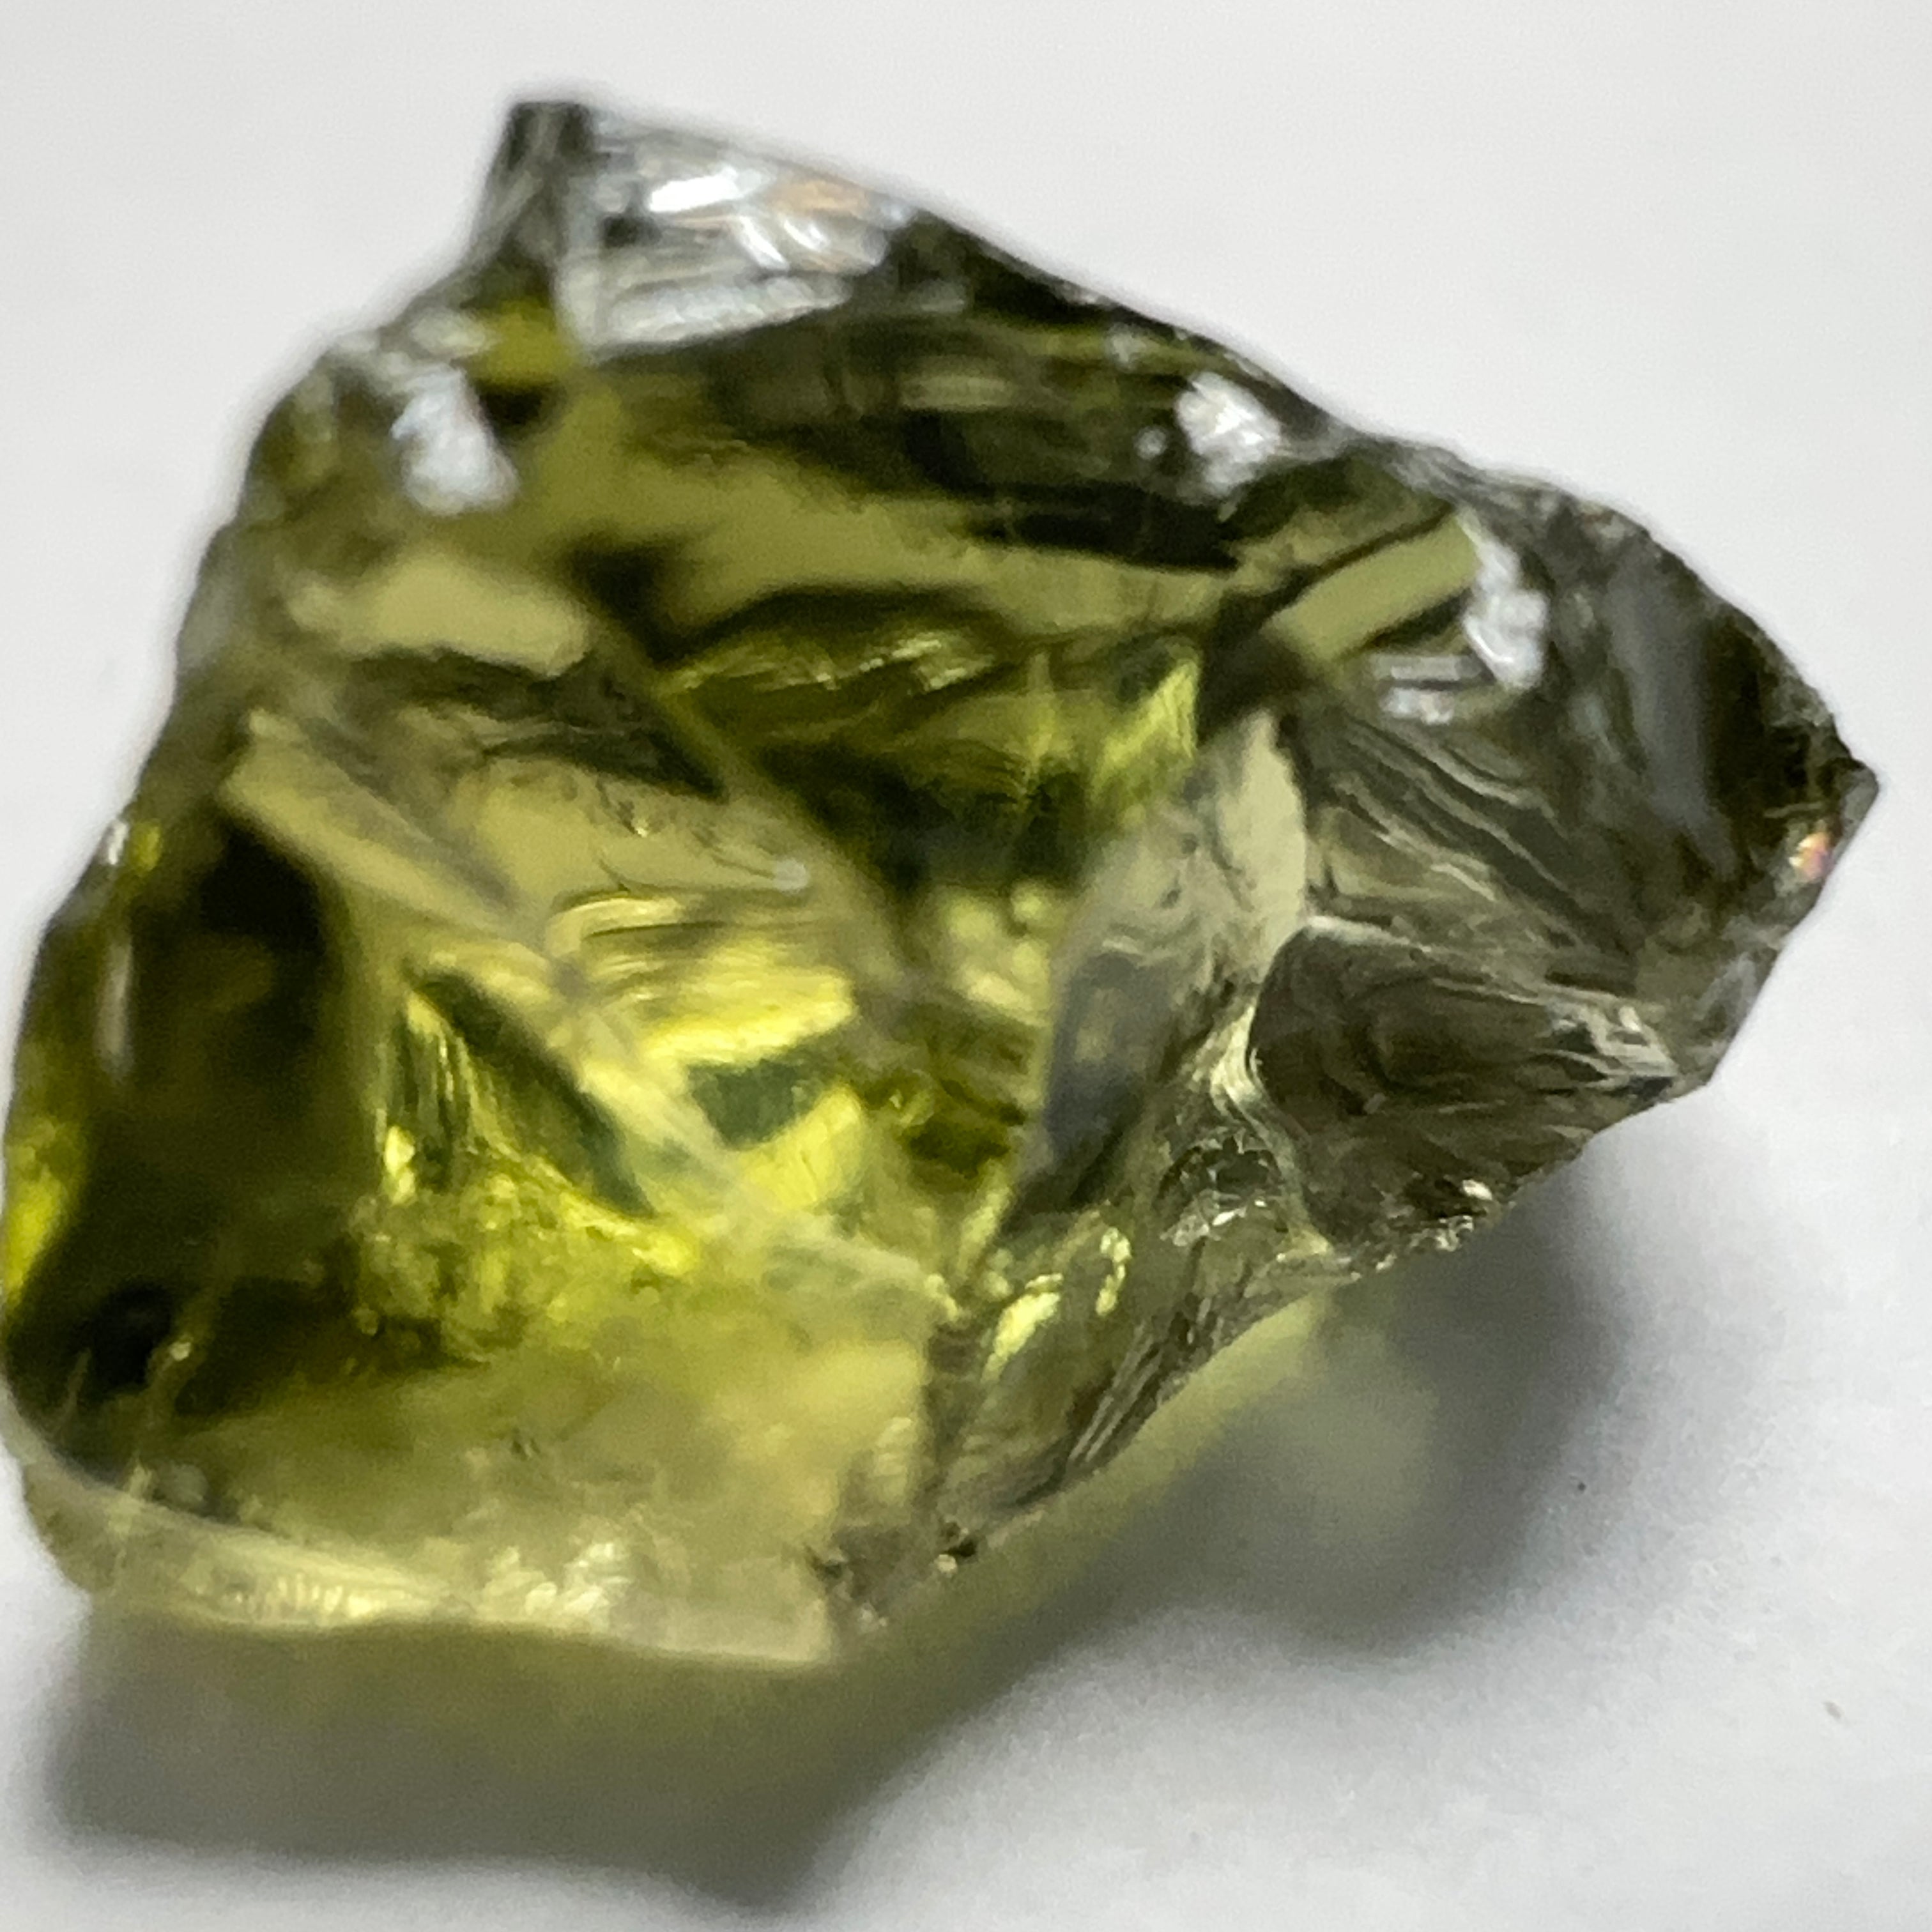 2.89ct Mozambique Tourmaline, VVS-IF, Untreated Unheated. Clean.